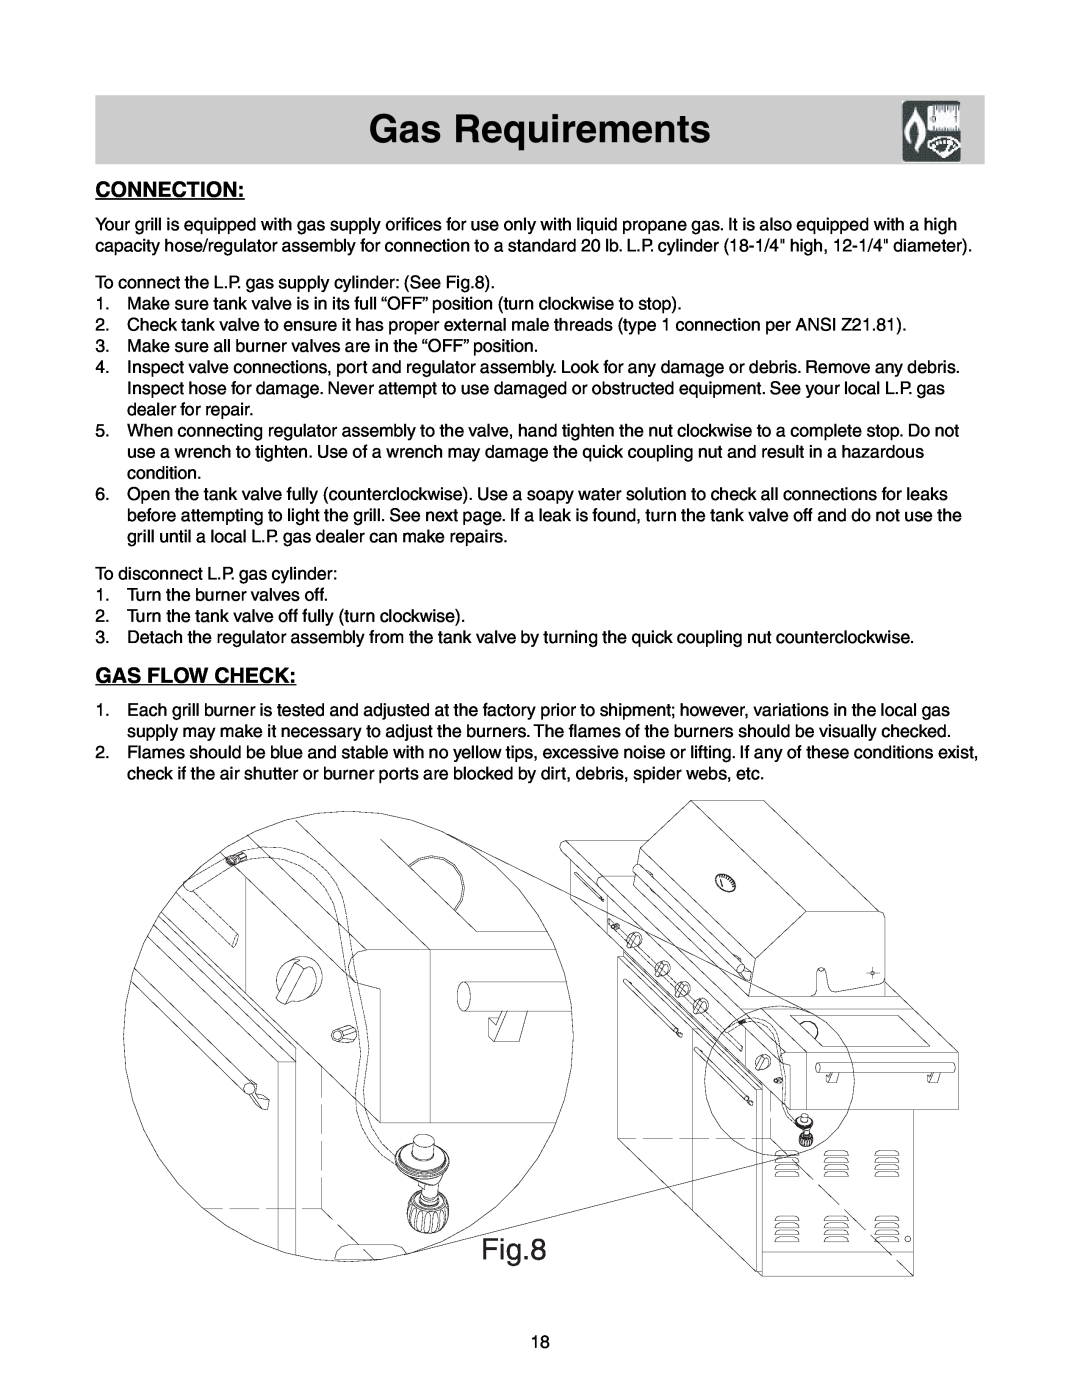 Frigidaire Grill with Electronic Ignition warranty Gas Requirements, Connection, Gas Flow Check 